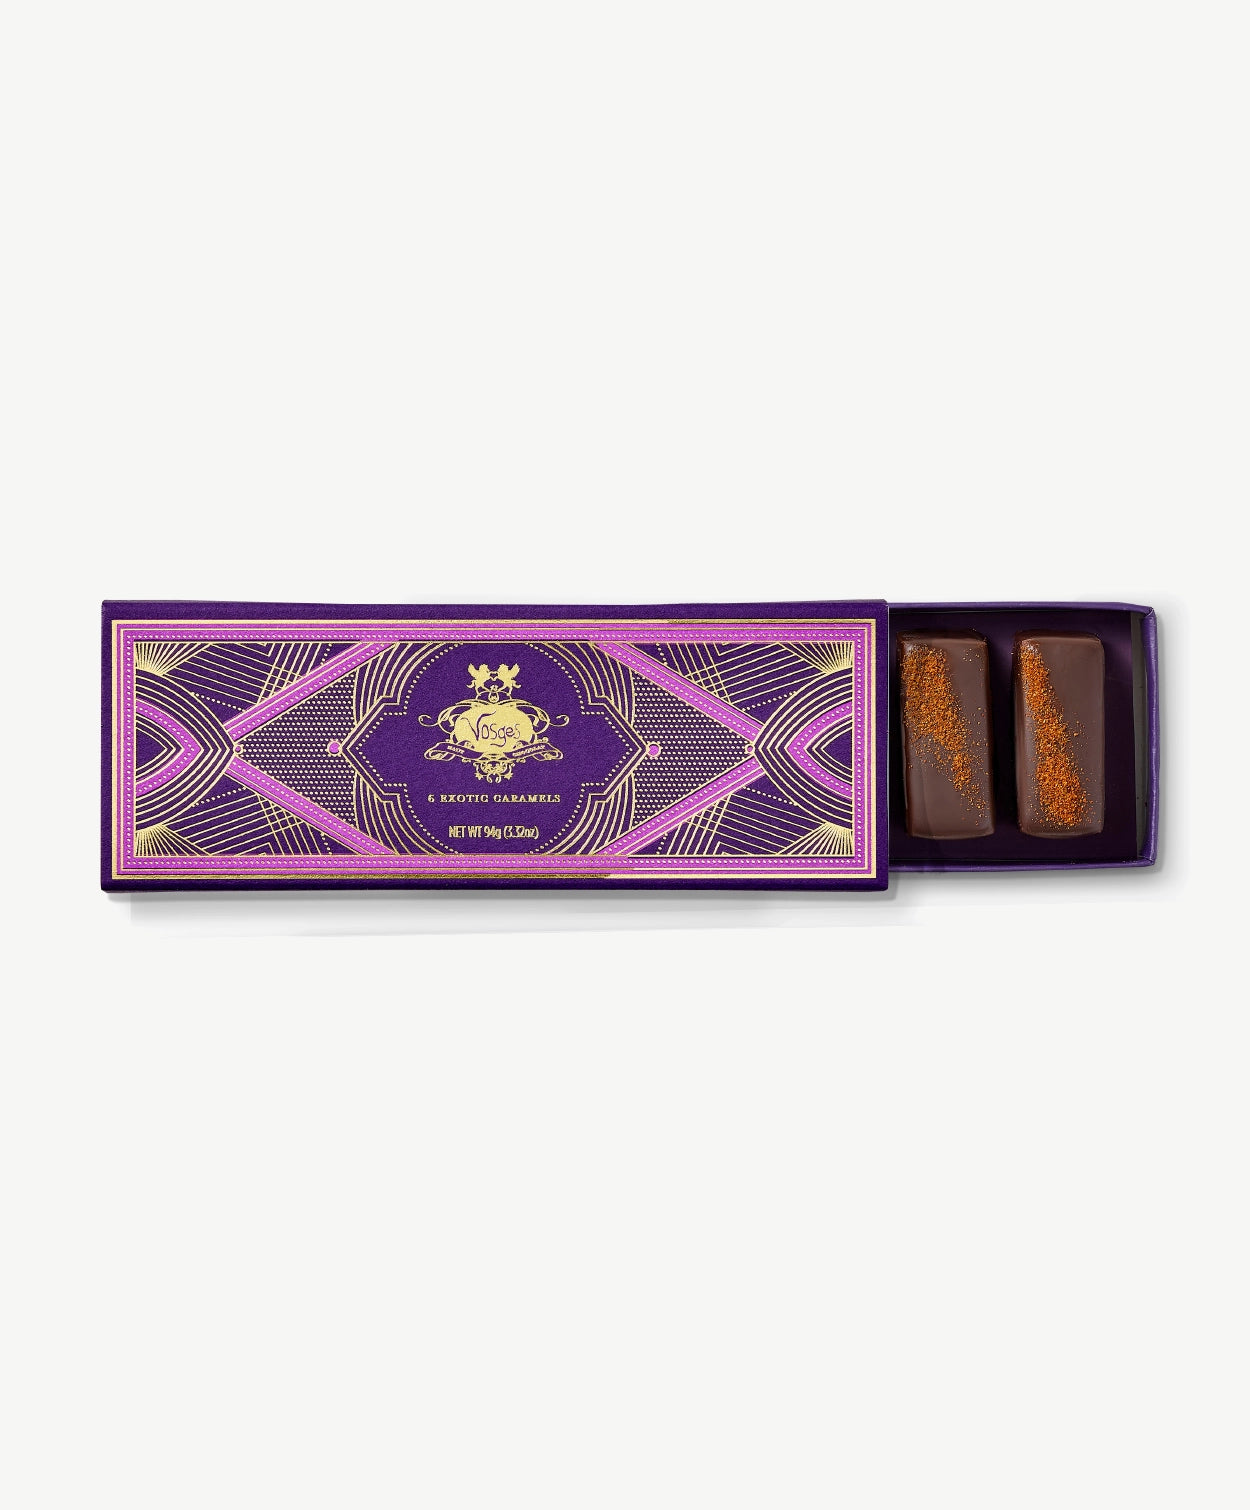 Purple Vosges Chocolate box opened revealing two chocolate covered caramels topped with Kokuto black sugar on a grey background.